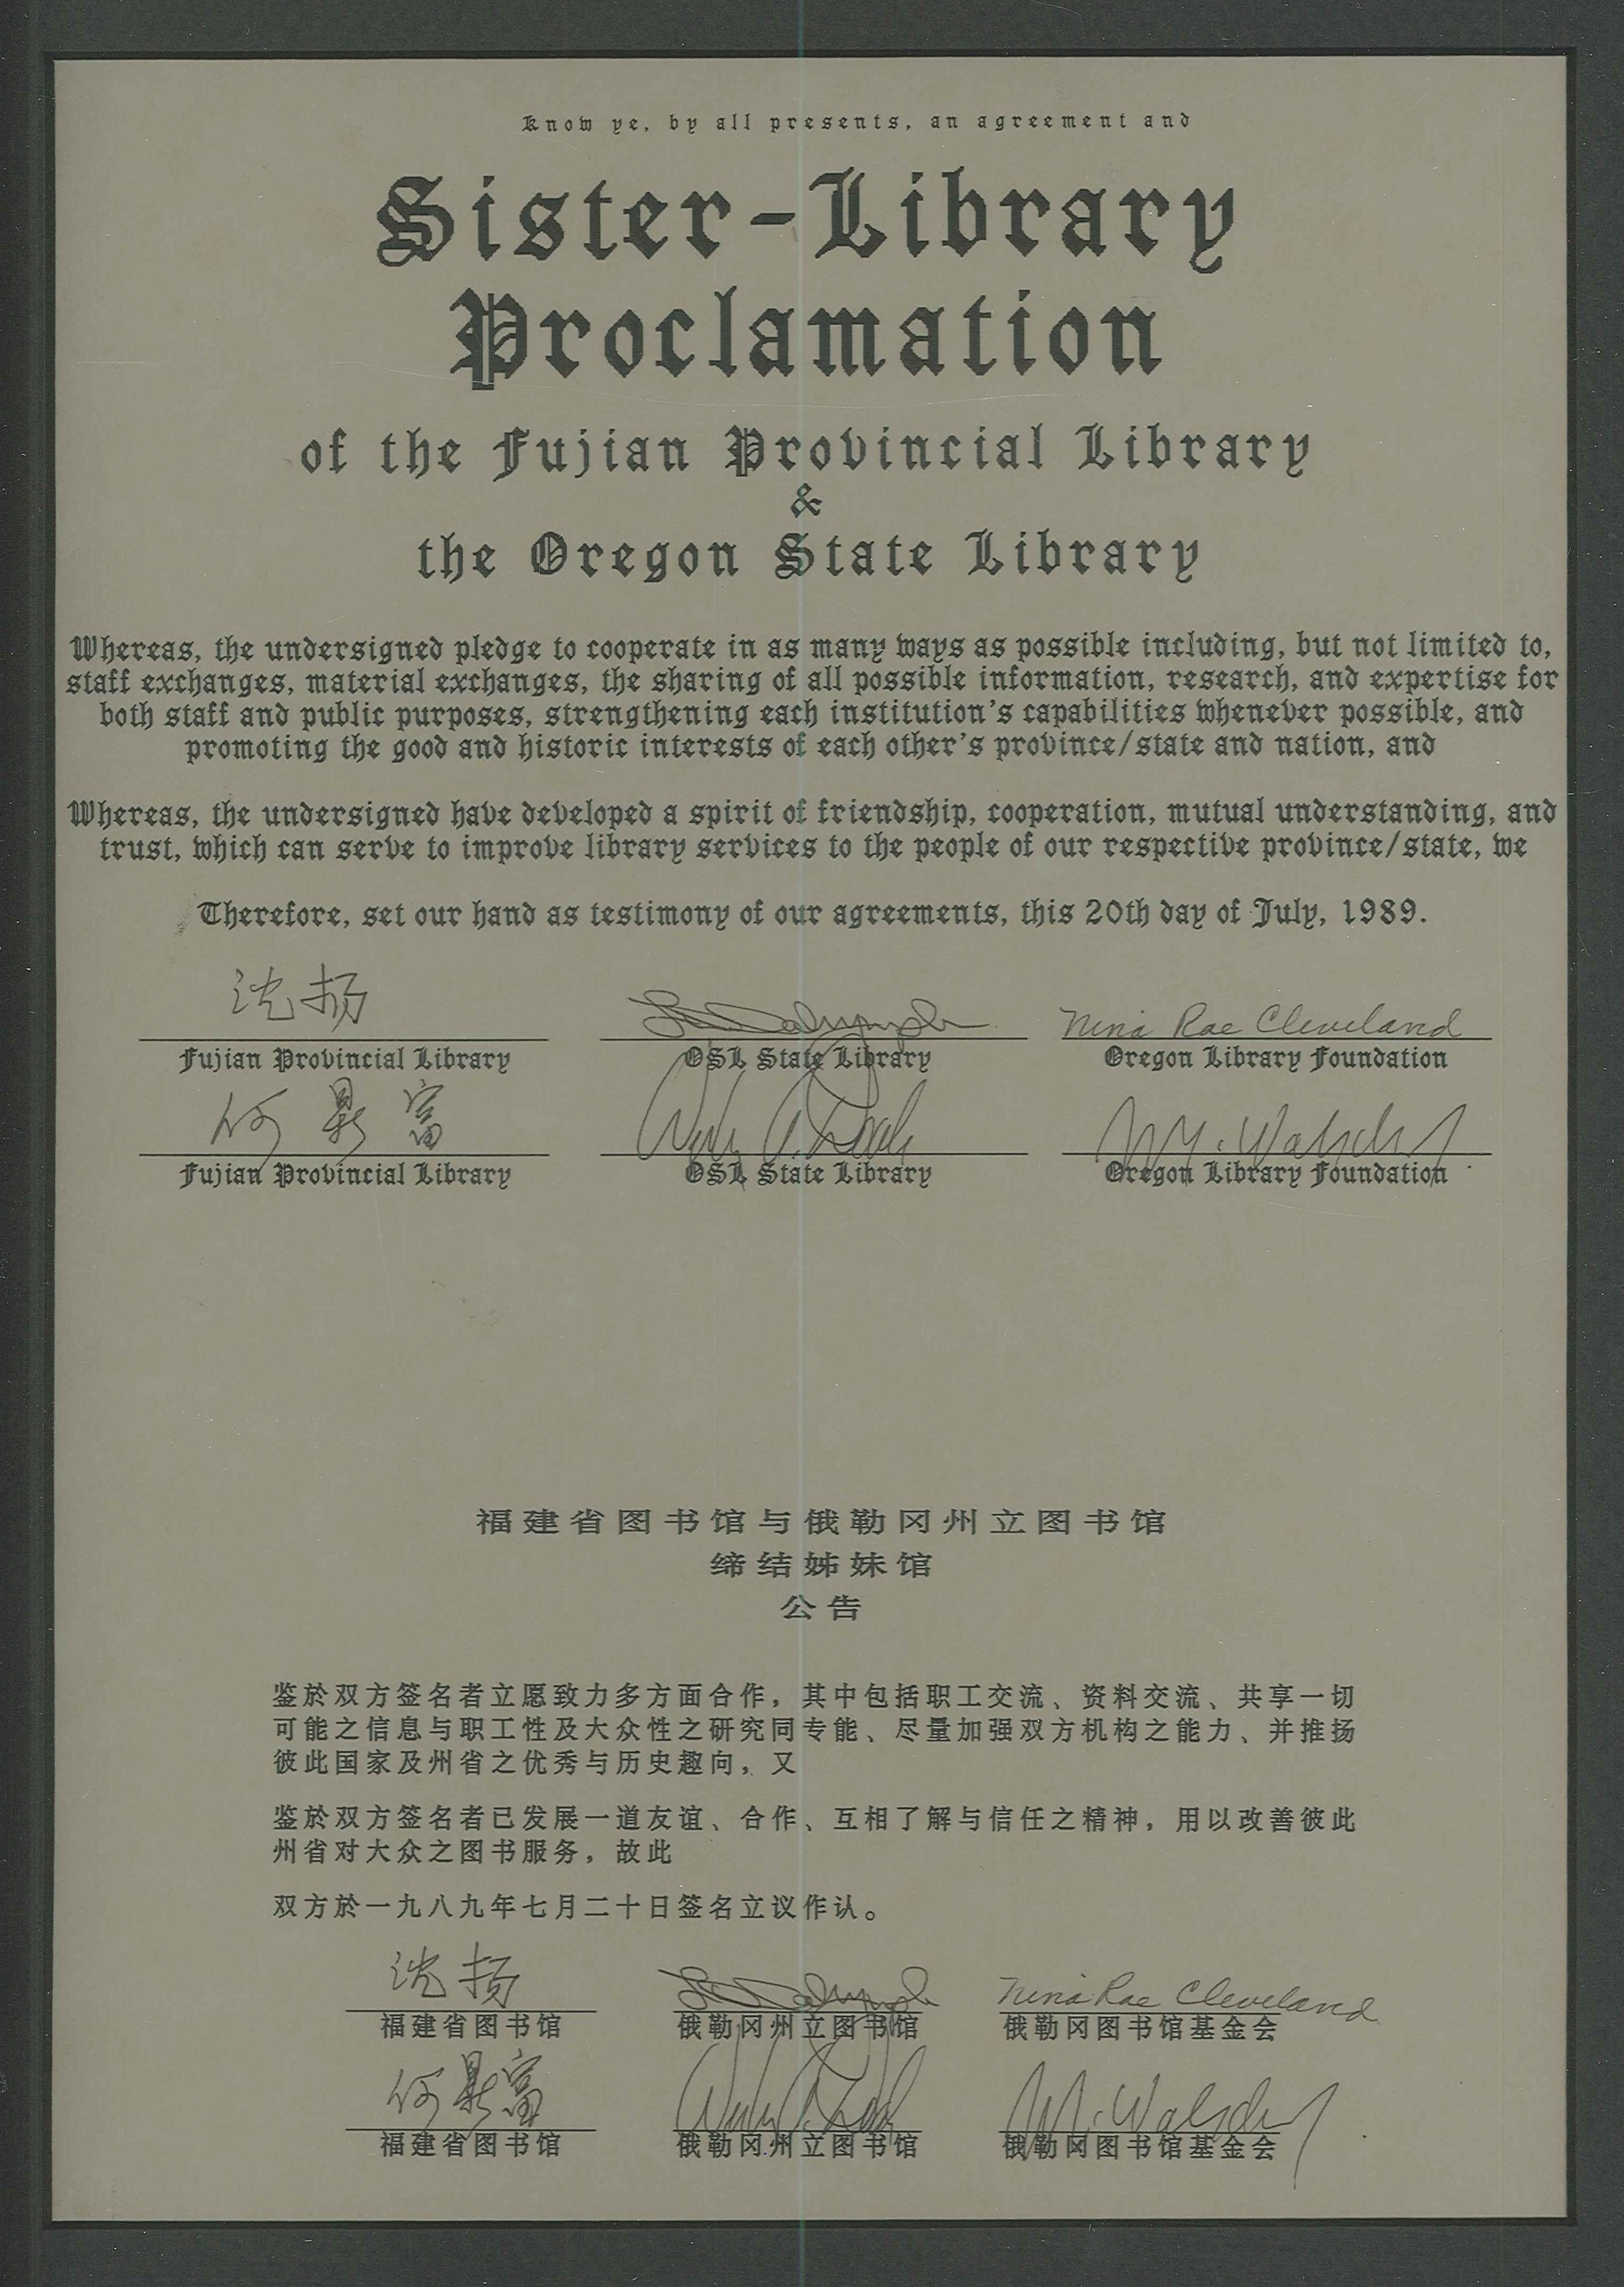 Sister-Library Proclamation document